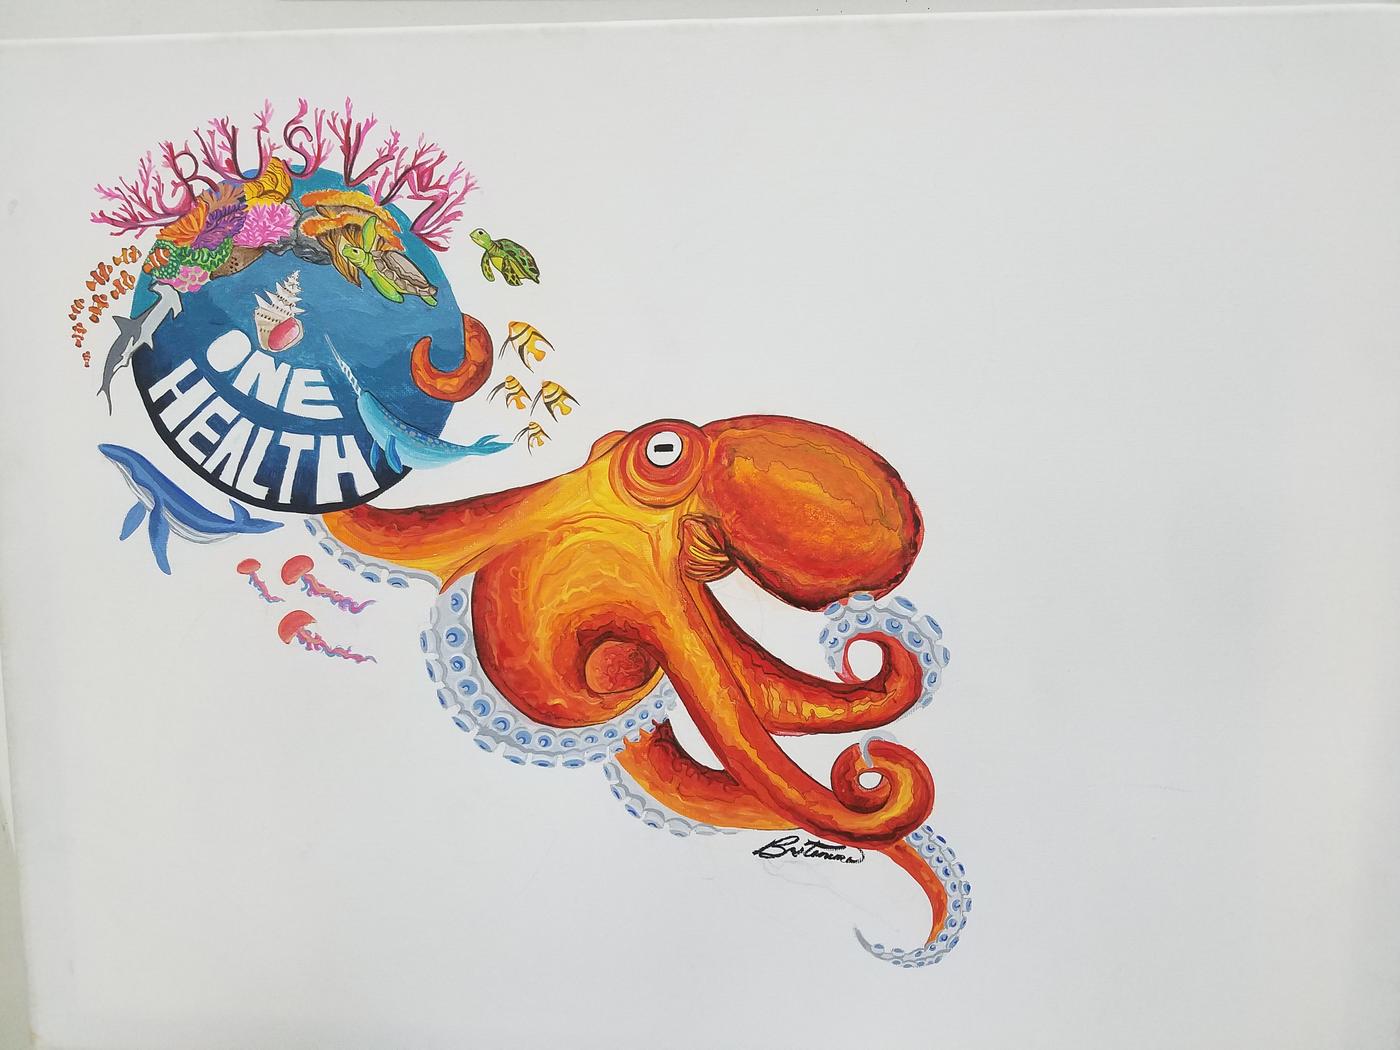 Art piece of octopus holding a globe with multiple sea creature species swimming around it with the words reading "One Health"